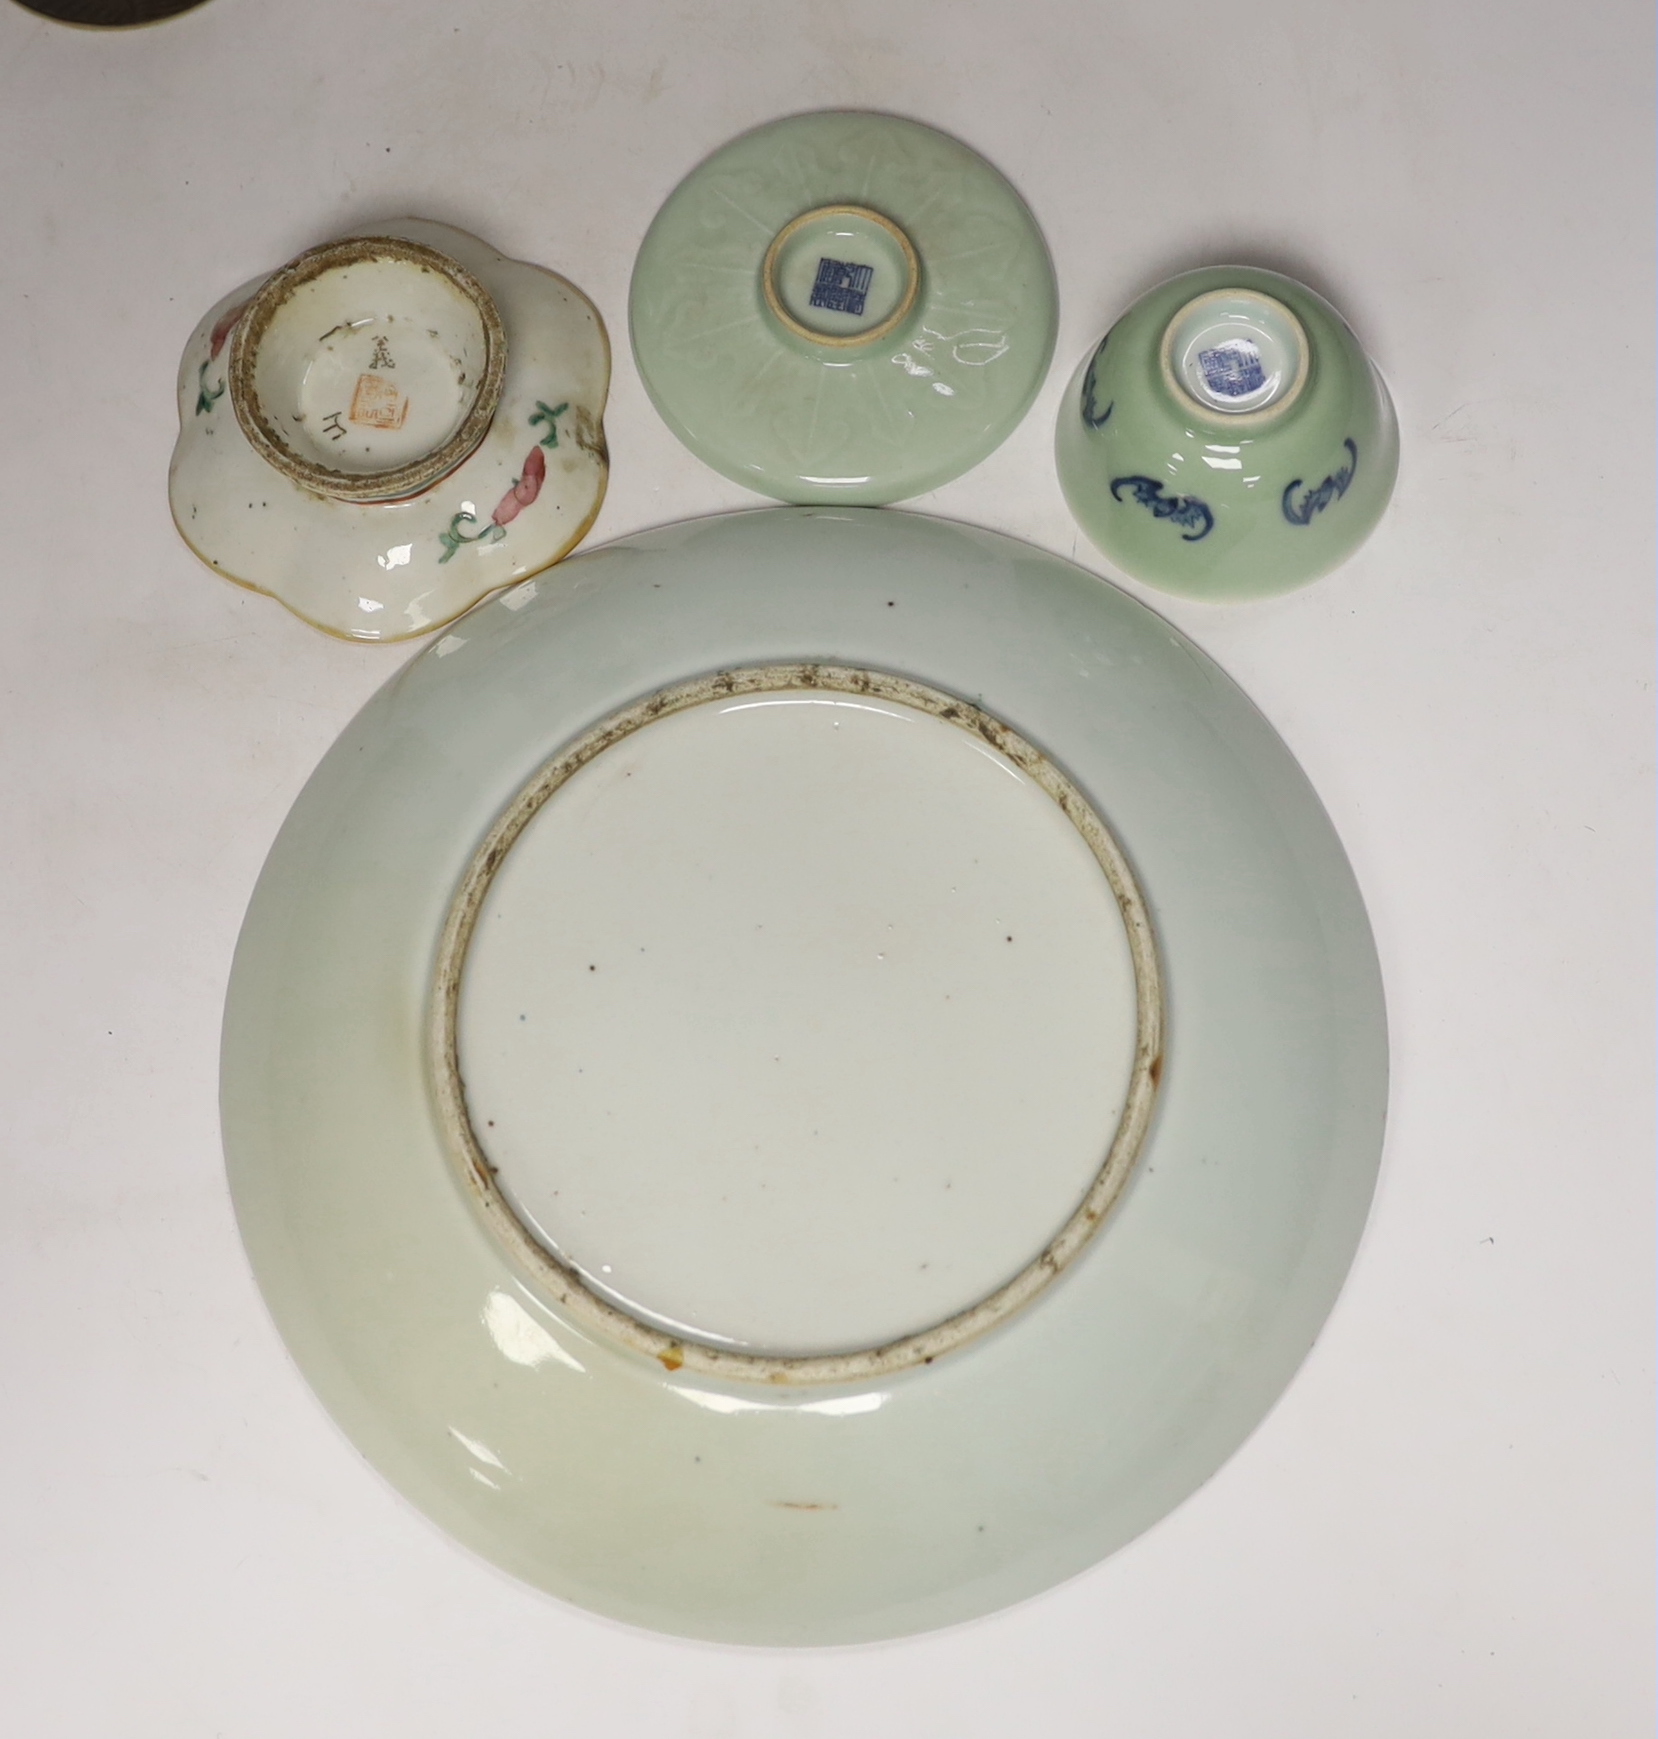 Five Chinese porcelain items including a blue and white crackle glaze cylindrical vase and a celadon glaze tea bowl and stand, largest 29cm in diameter